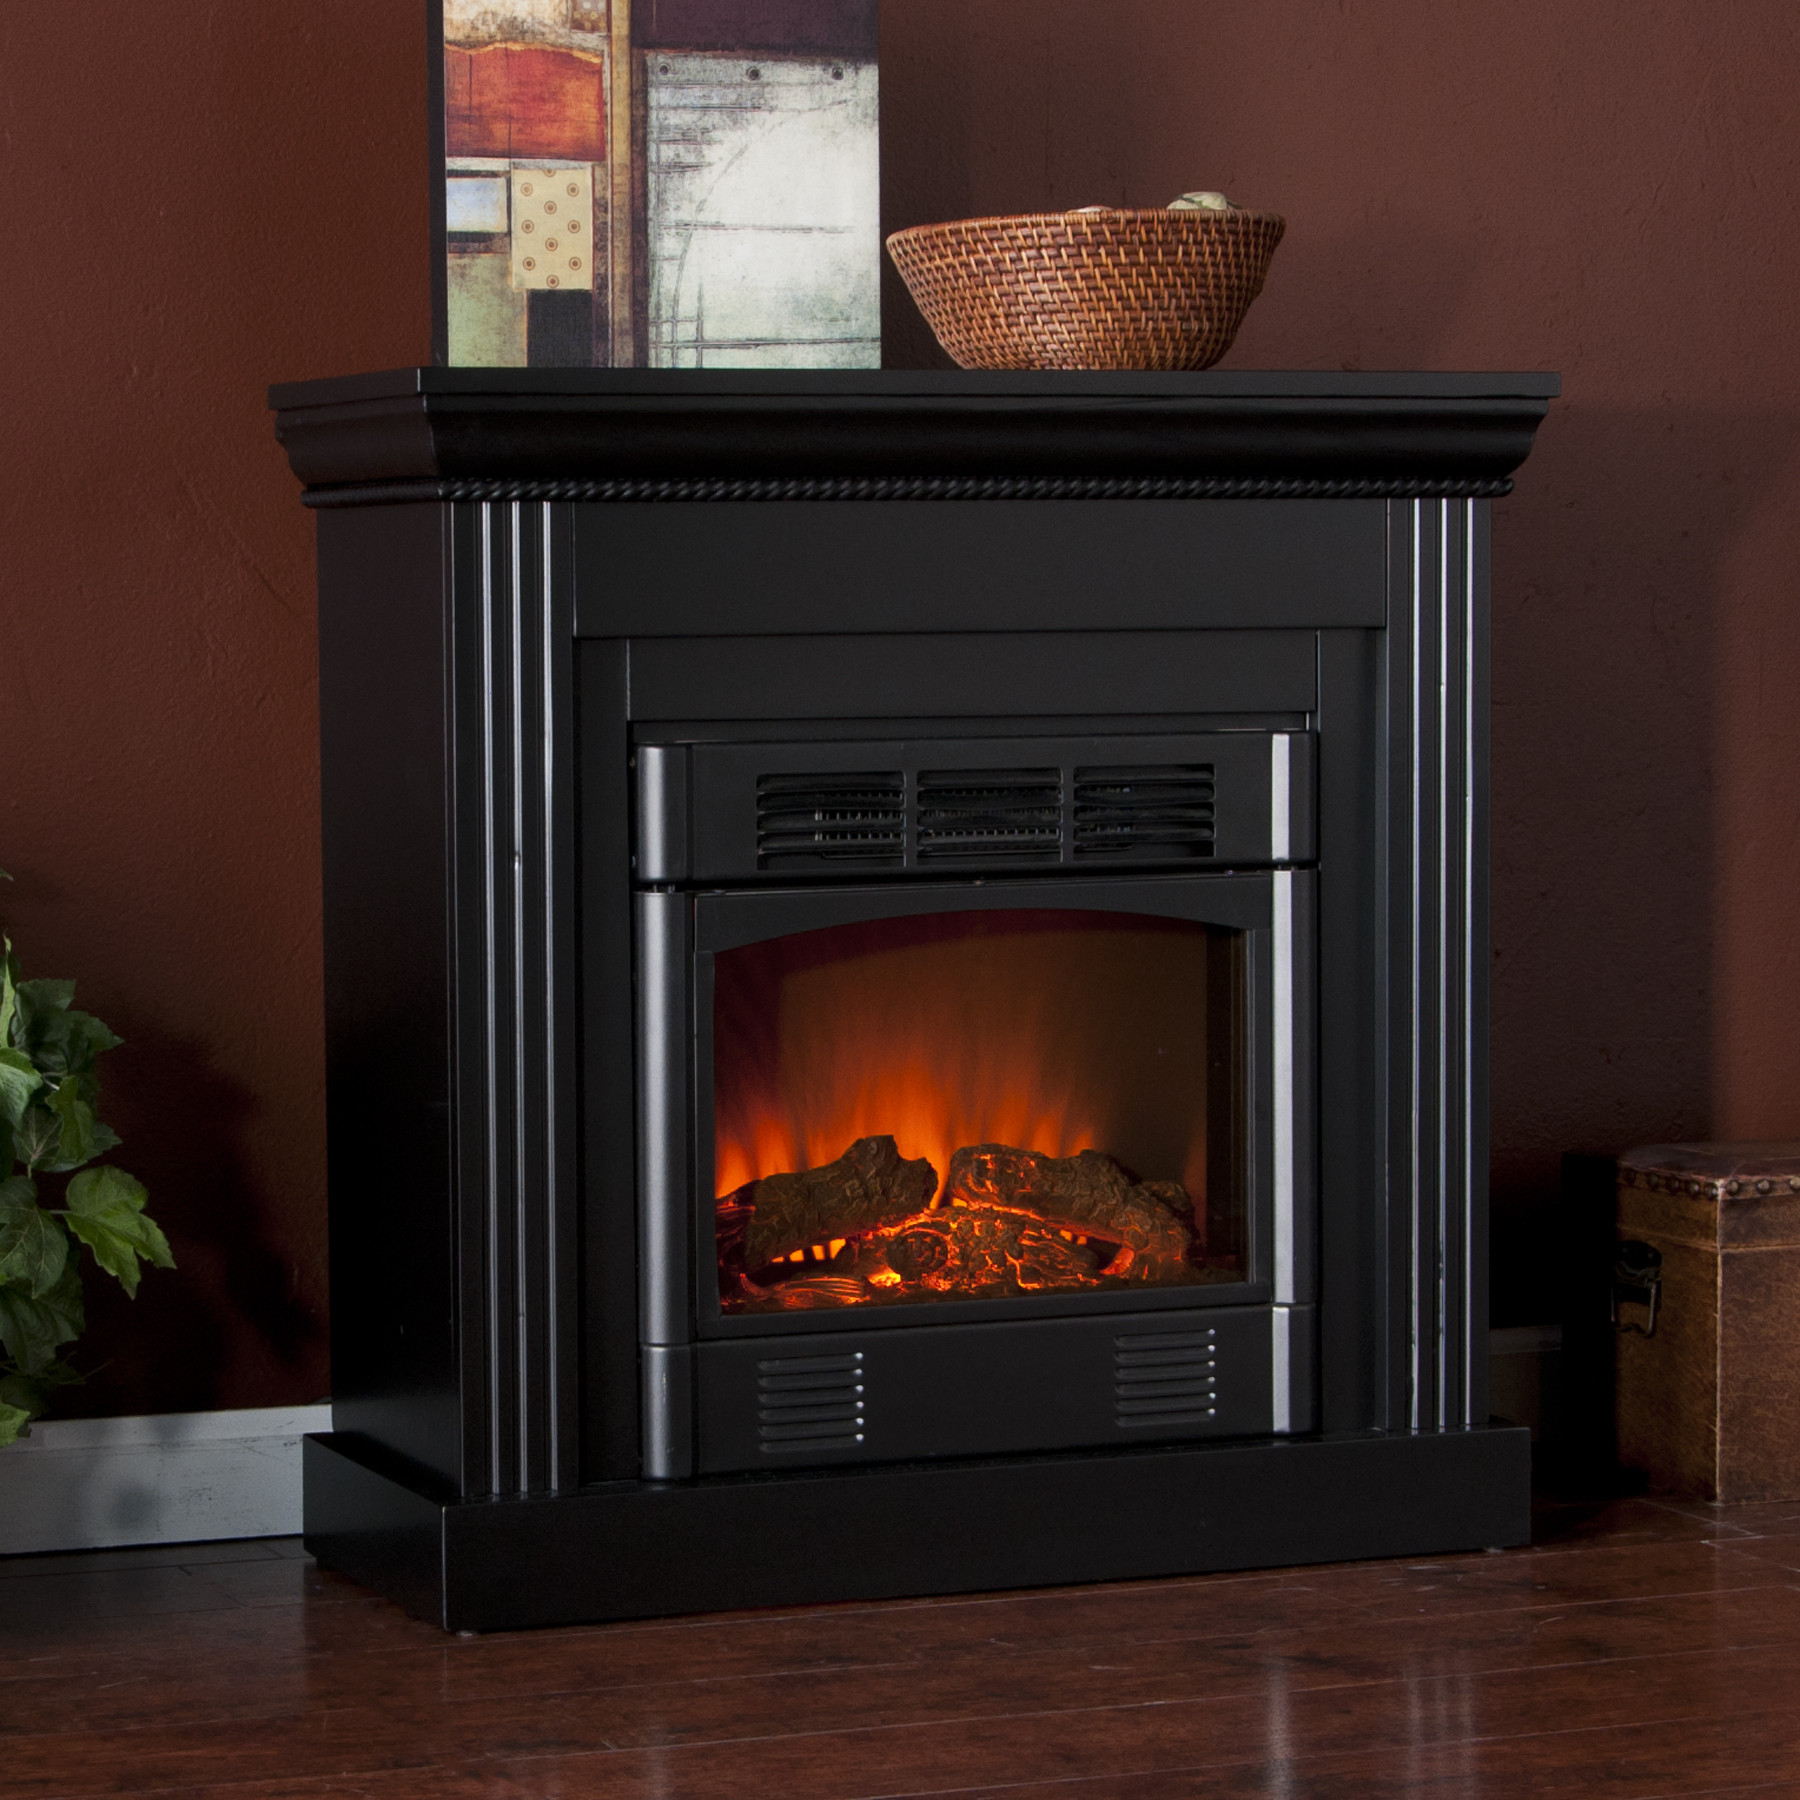 Electric Fireplace Black
 Holly & Martin™ Bastrop Petite Convertible Electric